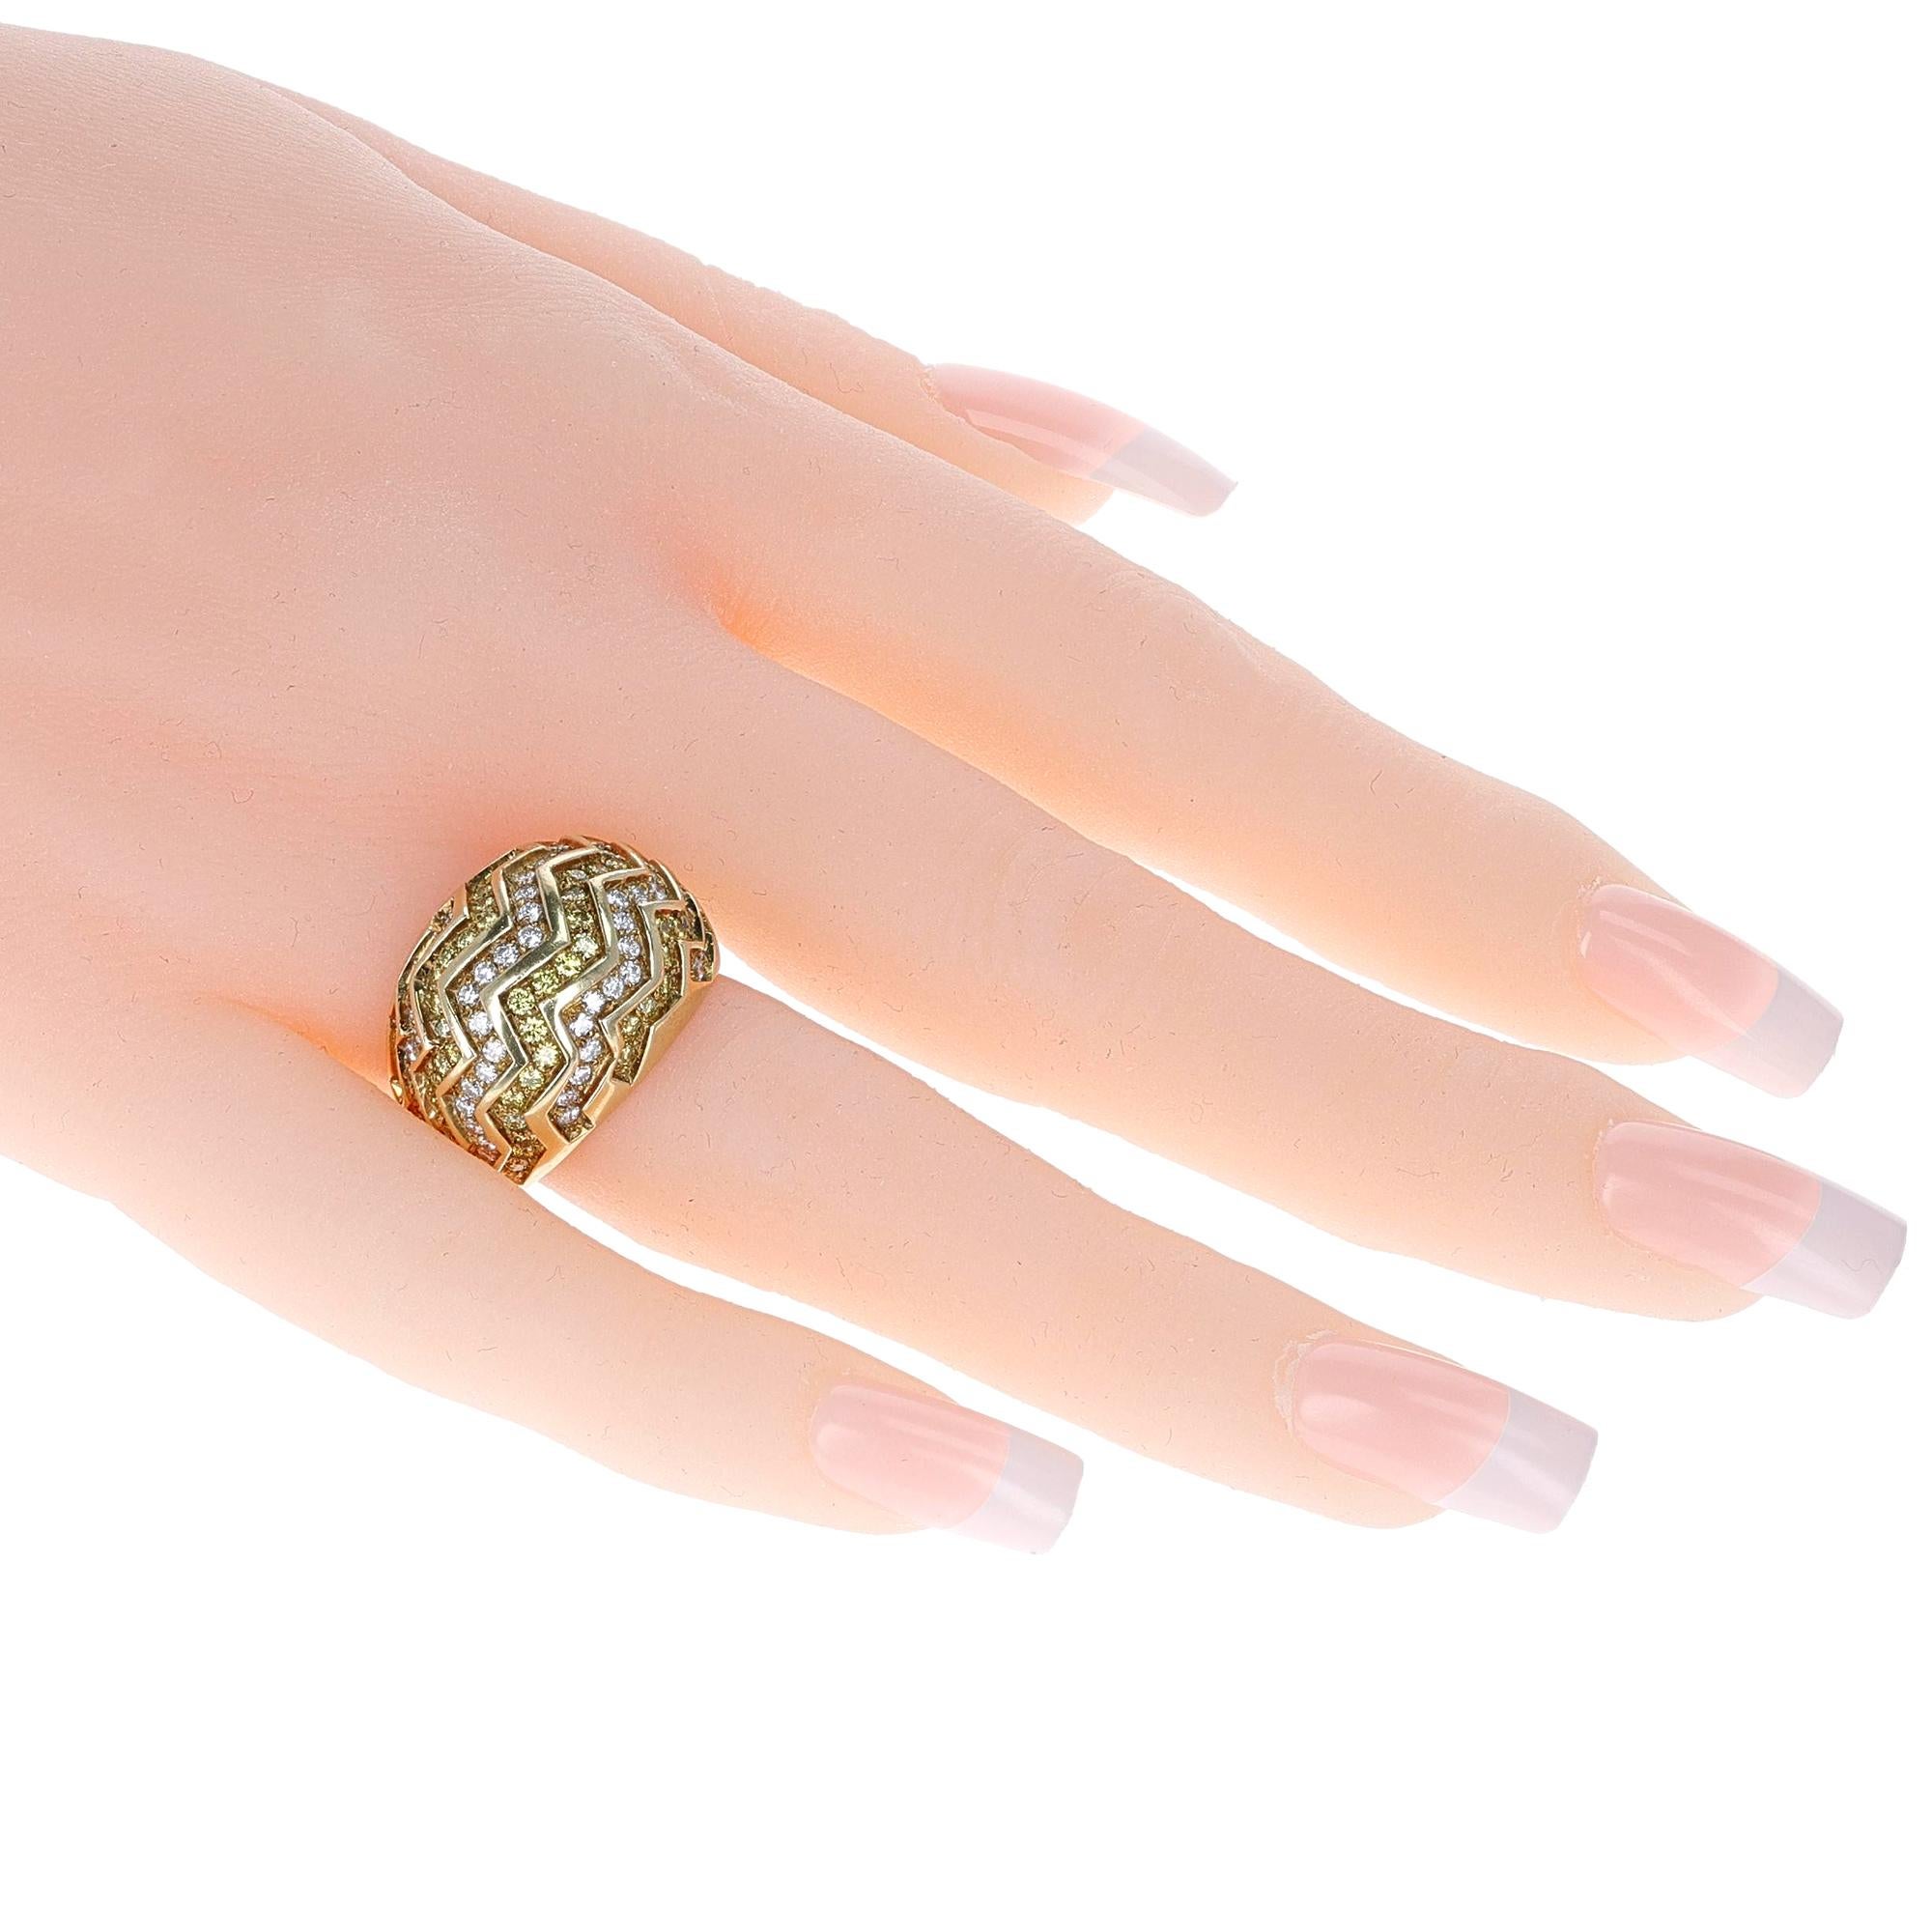 A Cartier White and Yellow Diamond Zig-Zag Bombe Ring made in 18 Karat Gold. The Ring Size is US 7.50. The total weight is 18.10 grams. 

SKU: 716-HEQALJP
